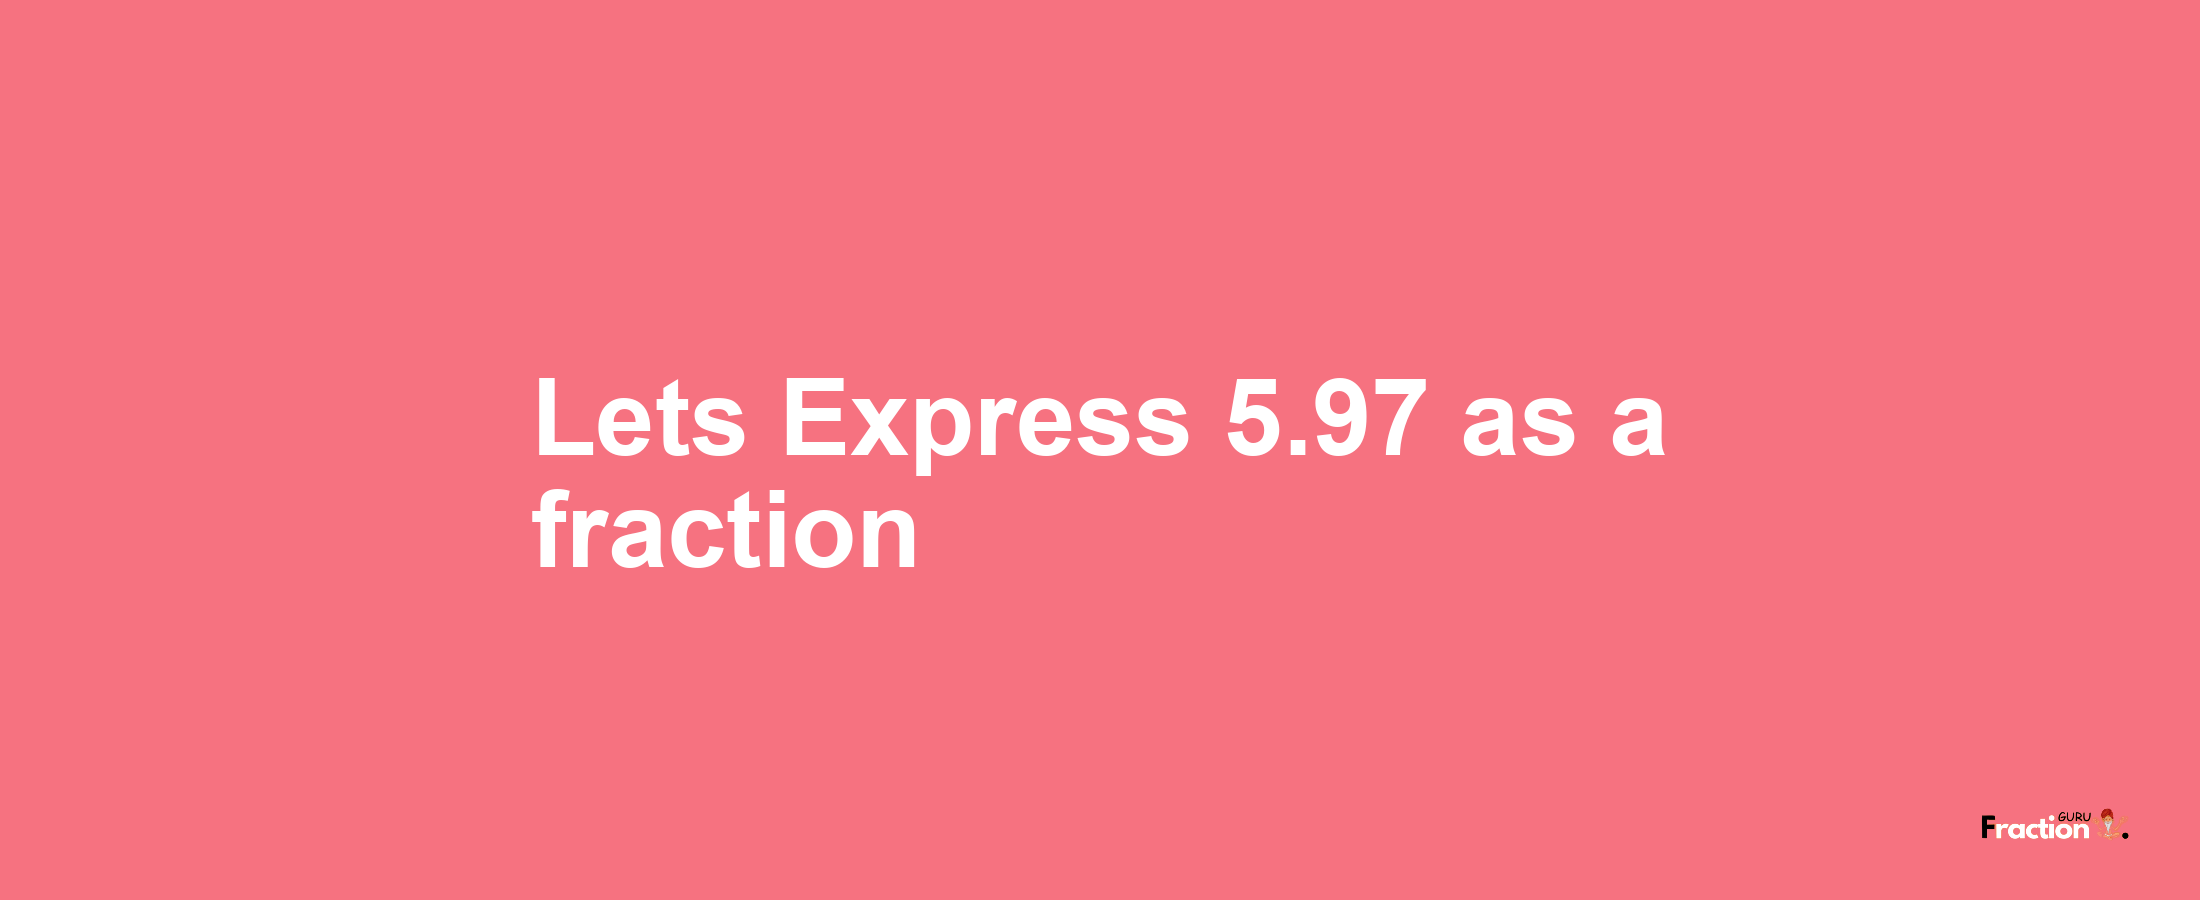 Lets Express 5.97 as afraction